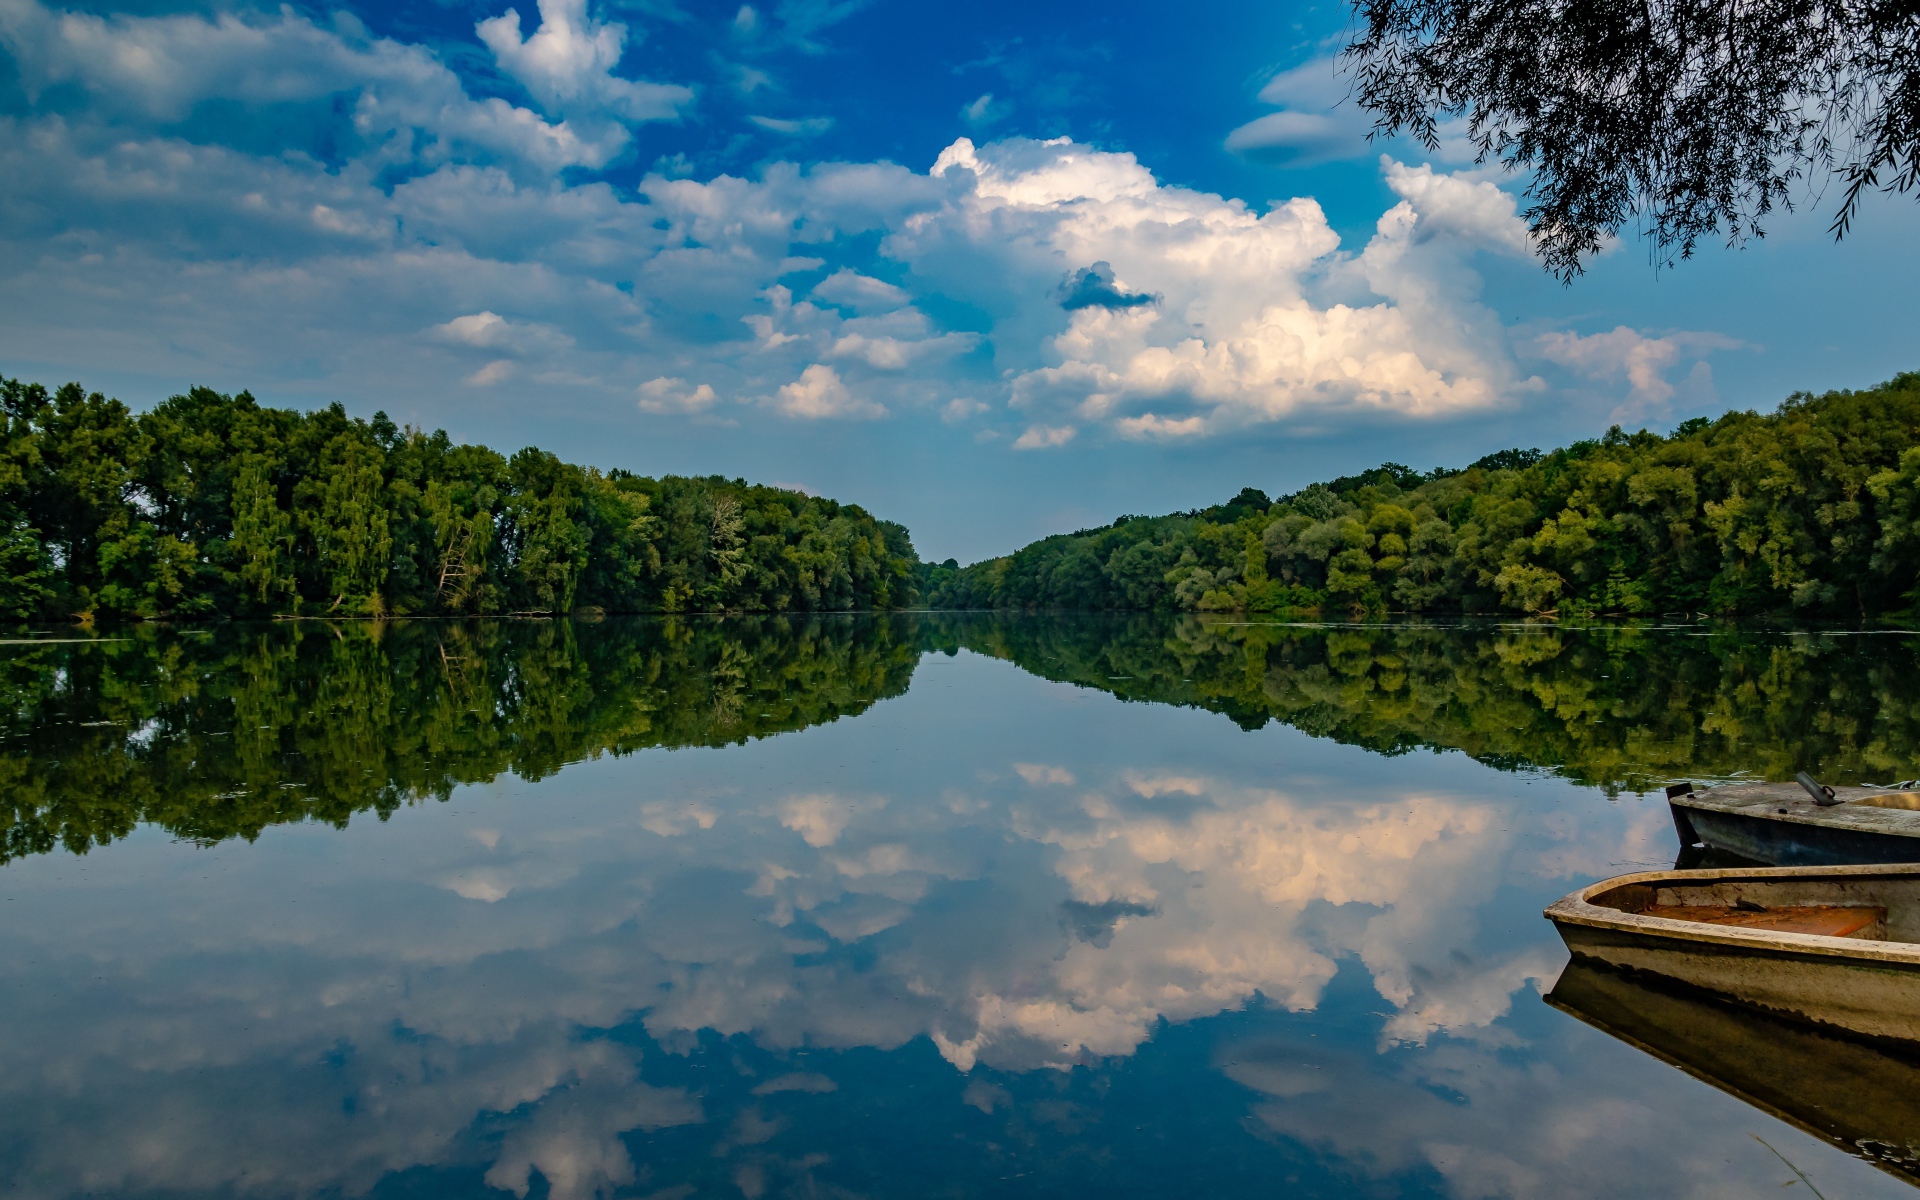 Beautiful blue sky and green forest reflected in the mirror of the lake